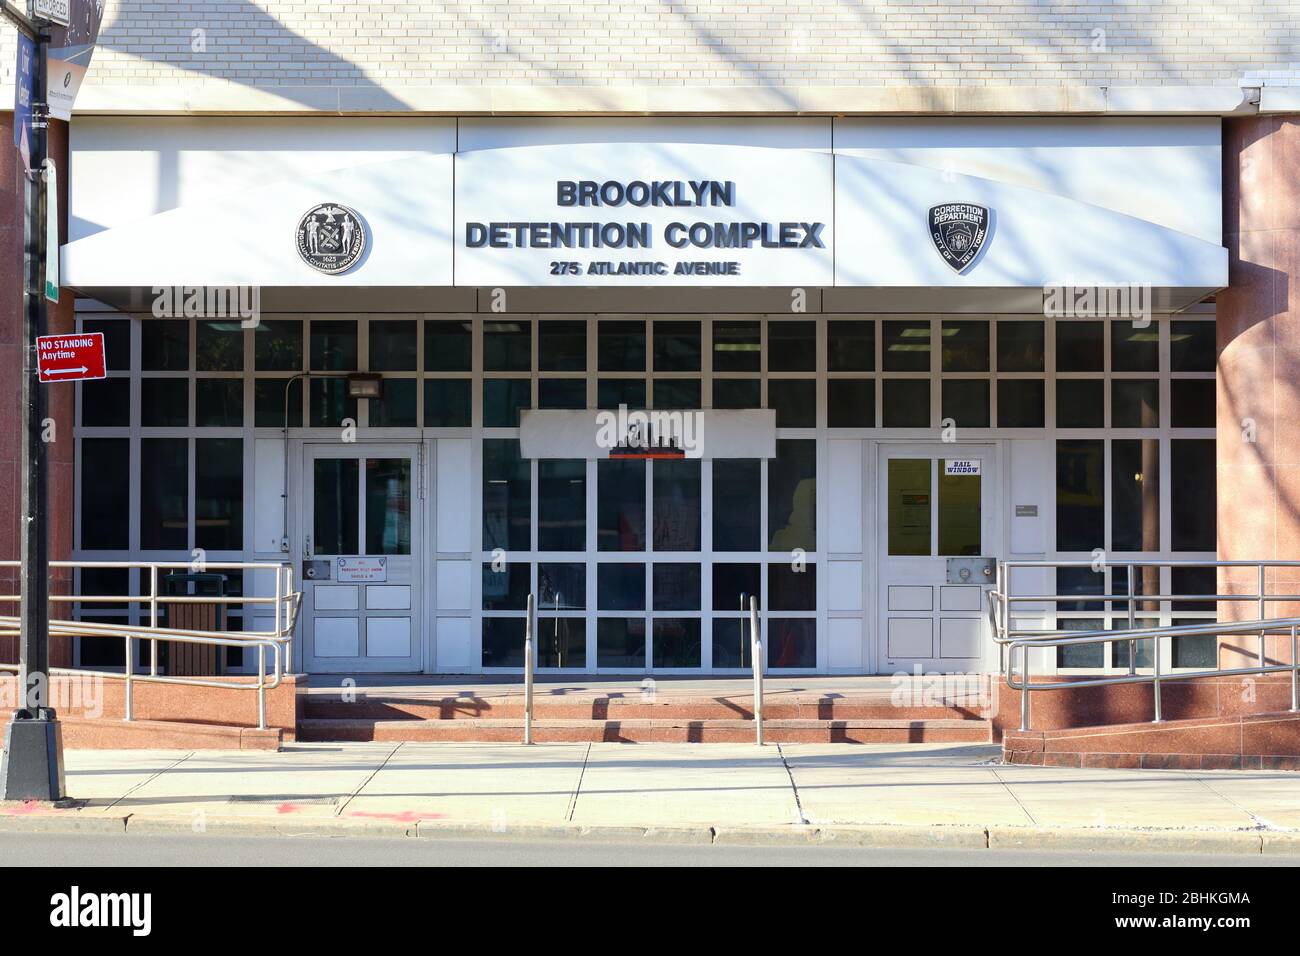 Brooklyn Detention Complex, 275 Atlantic Ave, Brooklyn, New York. NYC storefront photo of a jail house in Downtown Brooklyn. Stock Photo